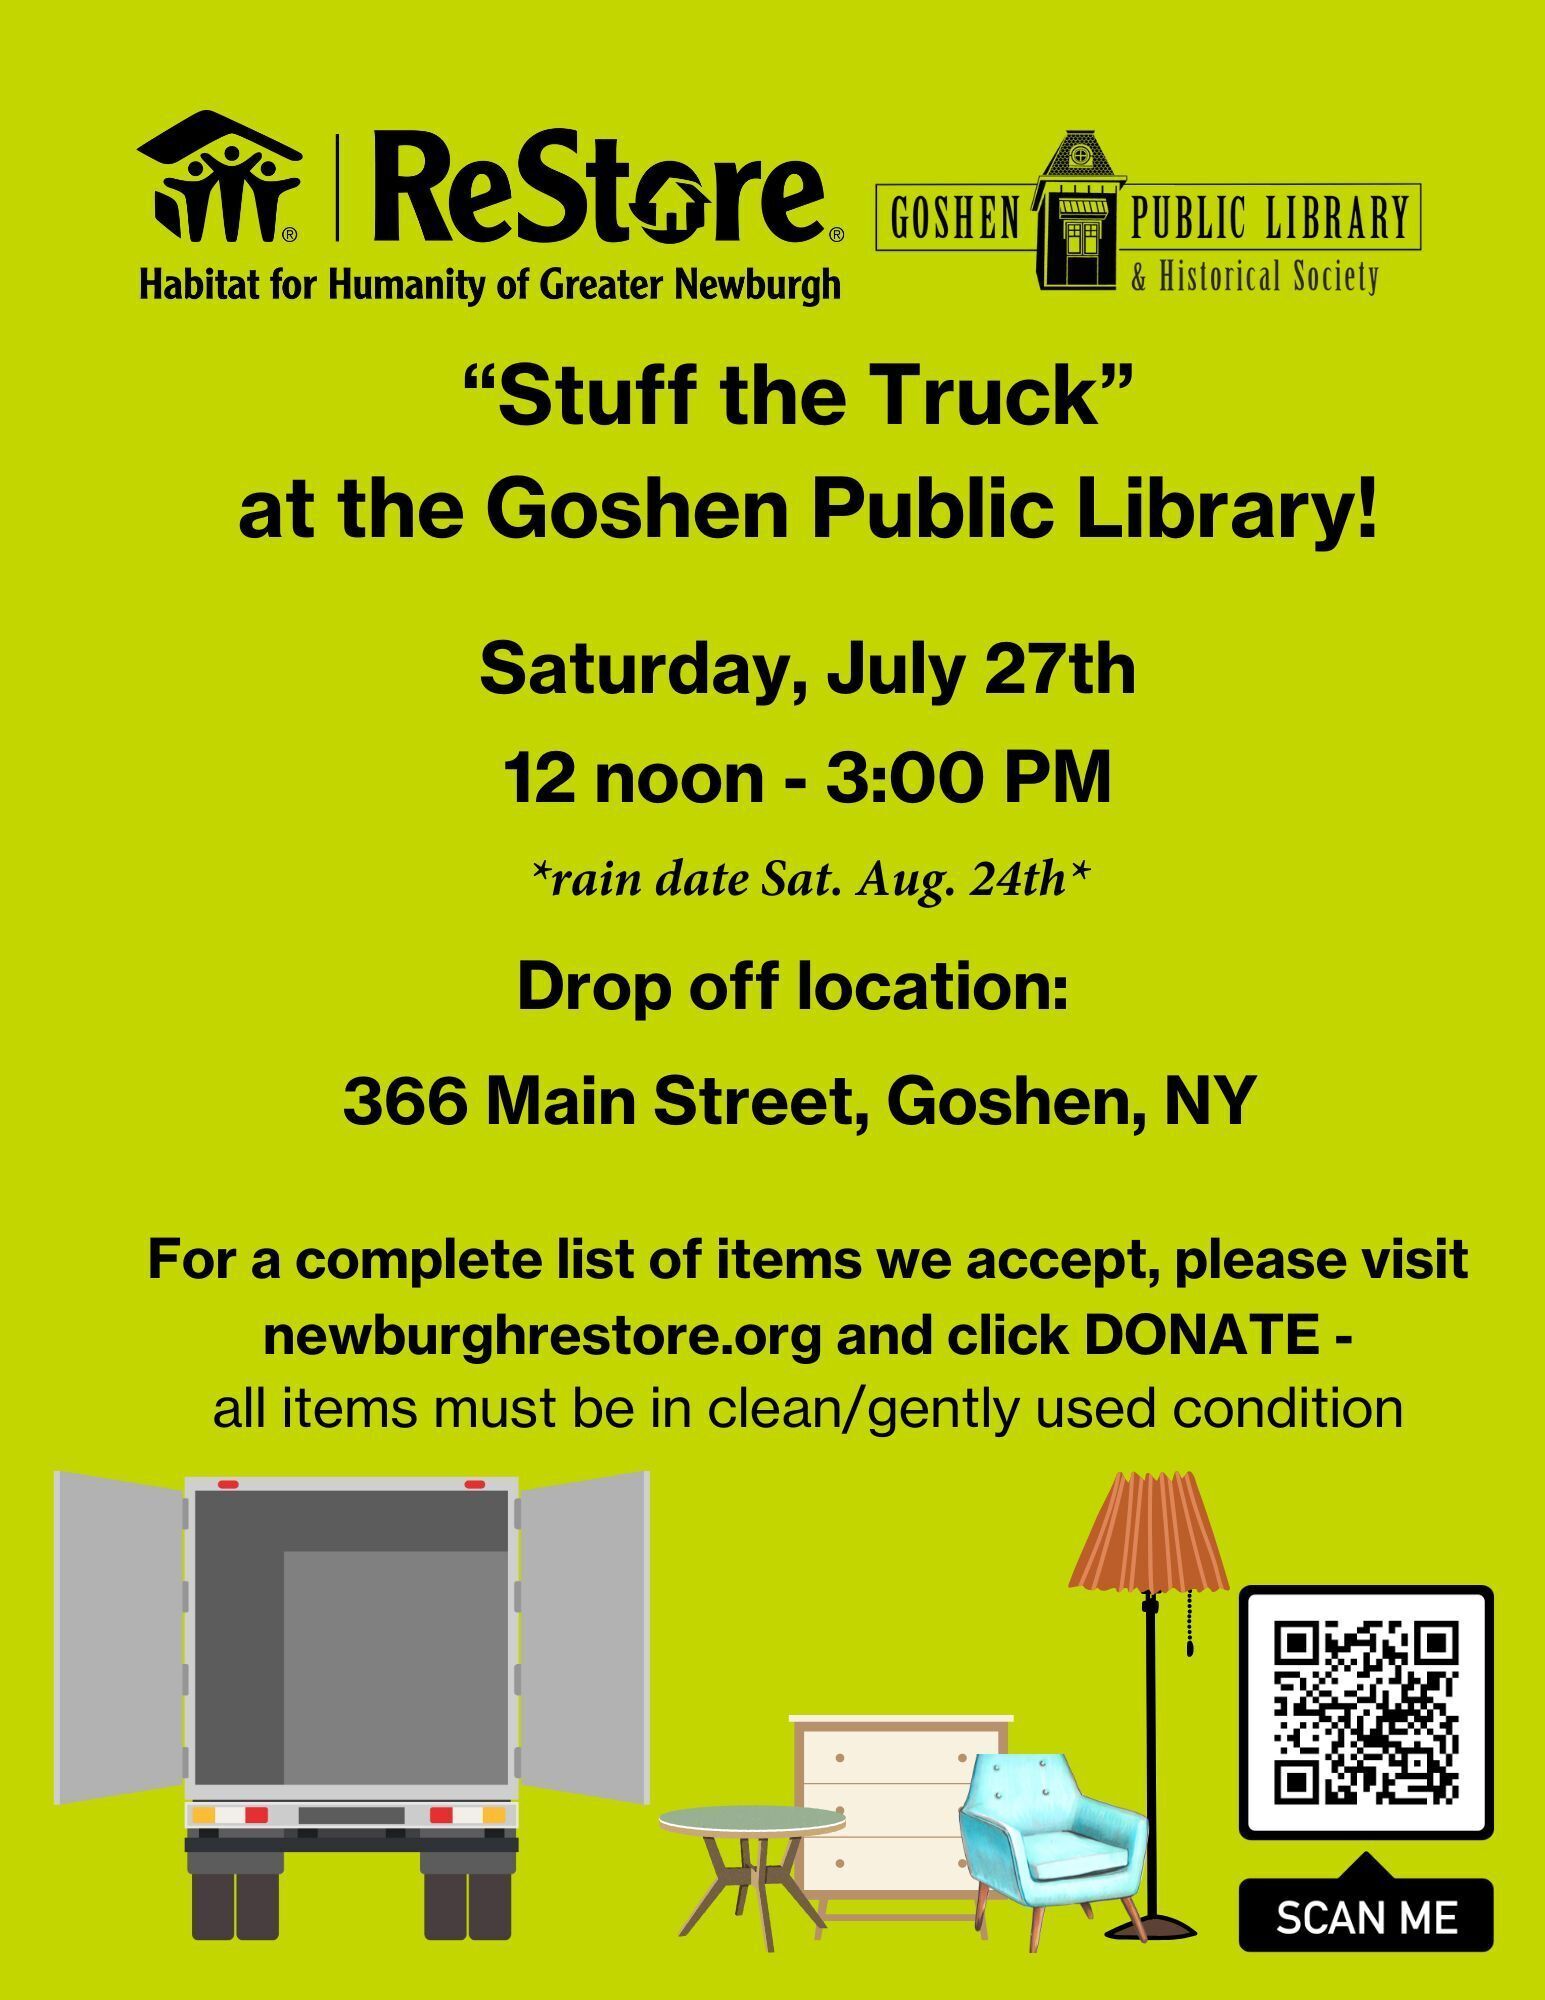 "Stuff the Truck" Event at Goshen Public Library July 27th!